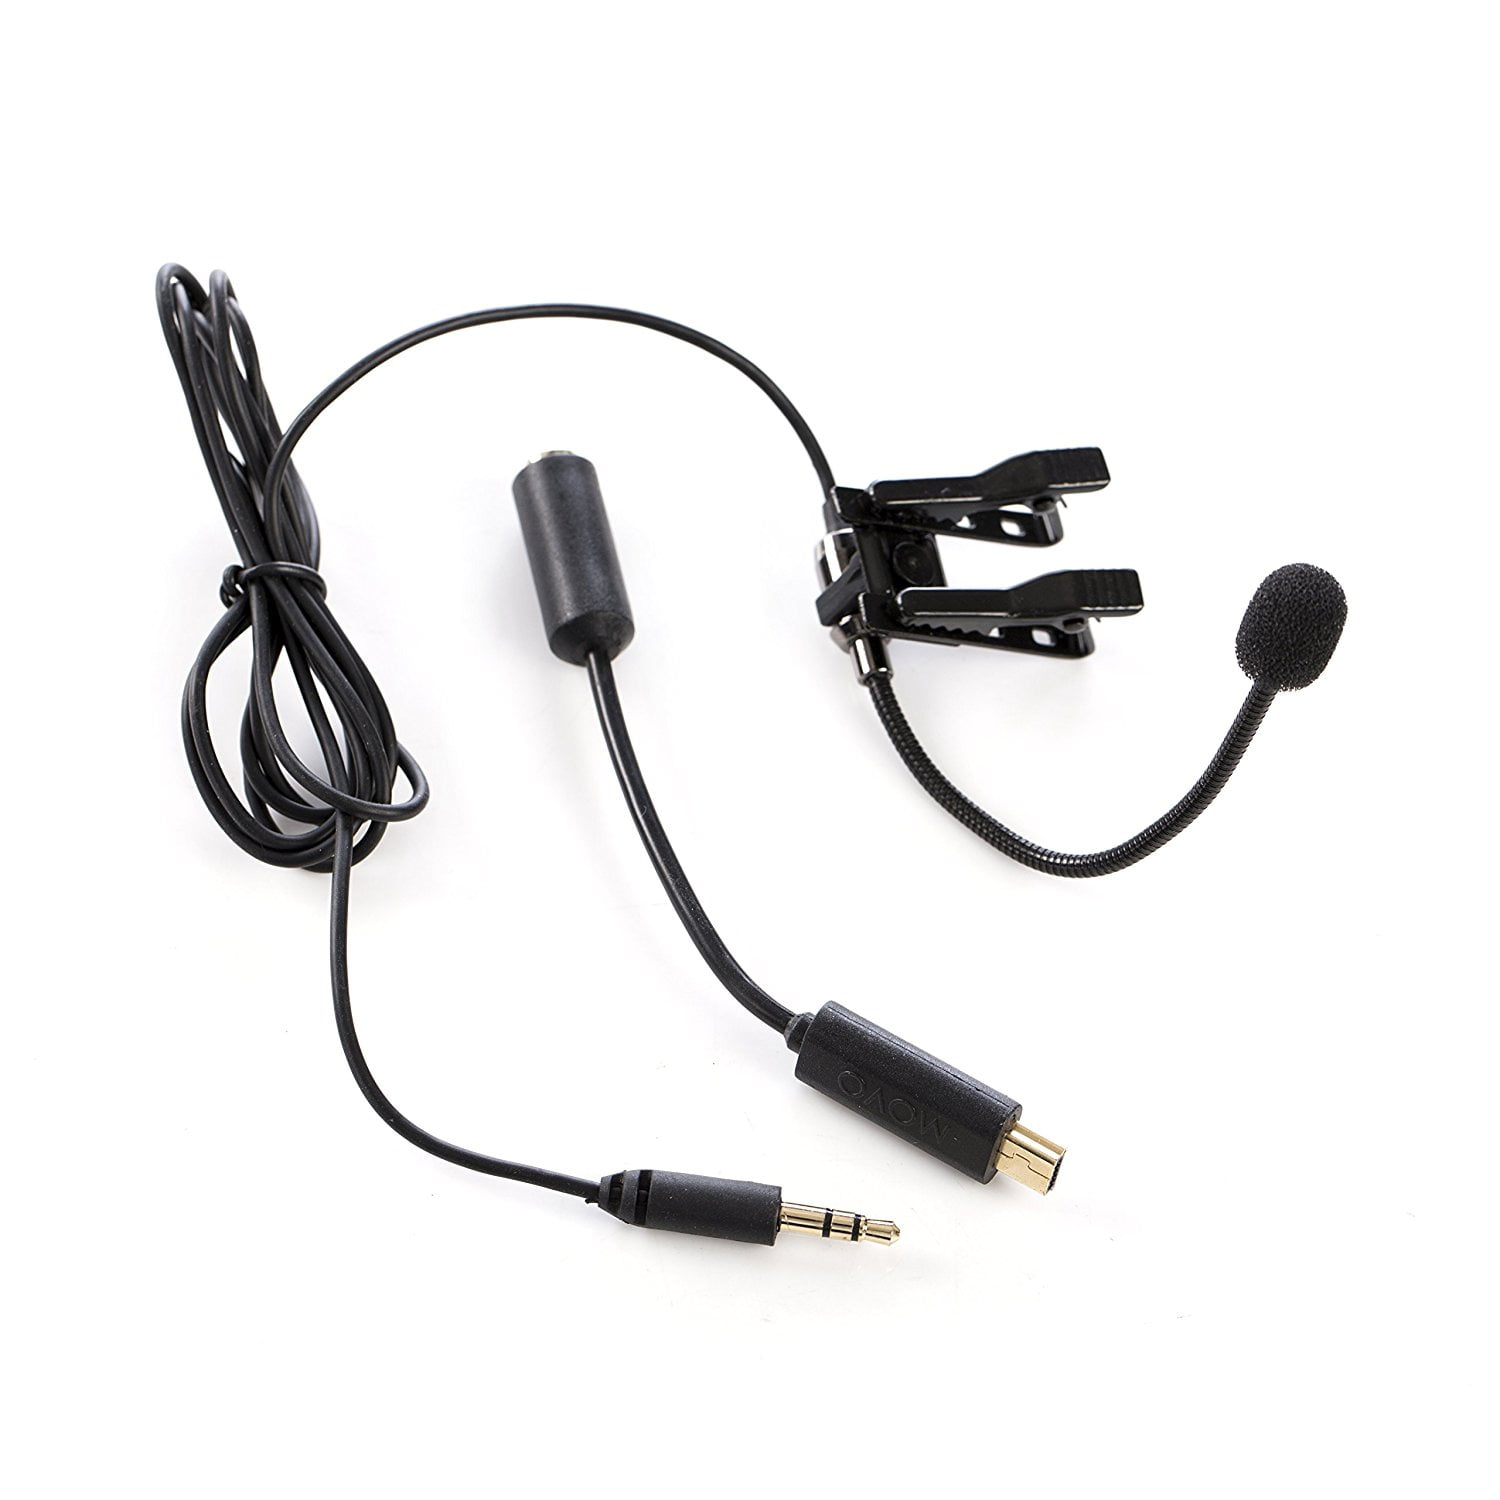  PowerDeWise Professional Grade Lavalier Clip On Microphone -  Lav Mic for Camera Phone iPhone GoPro Video Recording ASMR - Small Noise  Cancelling 3.5mm Tiny Shirt Microphone with Easy Clip On System 